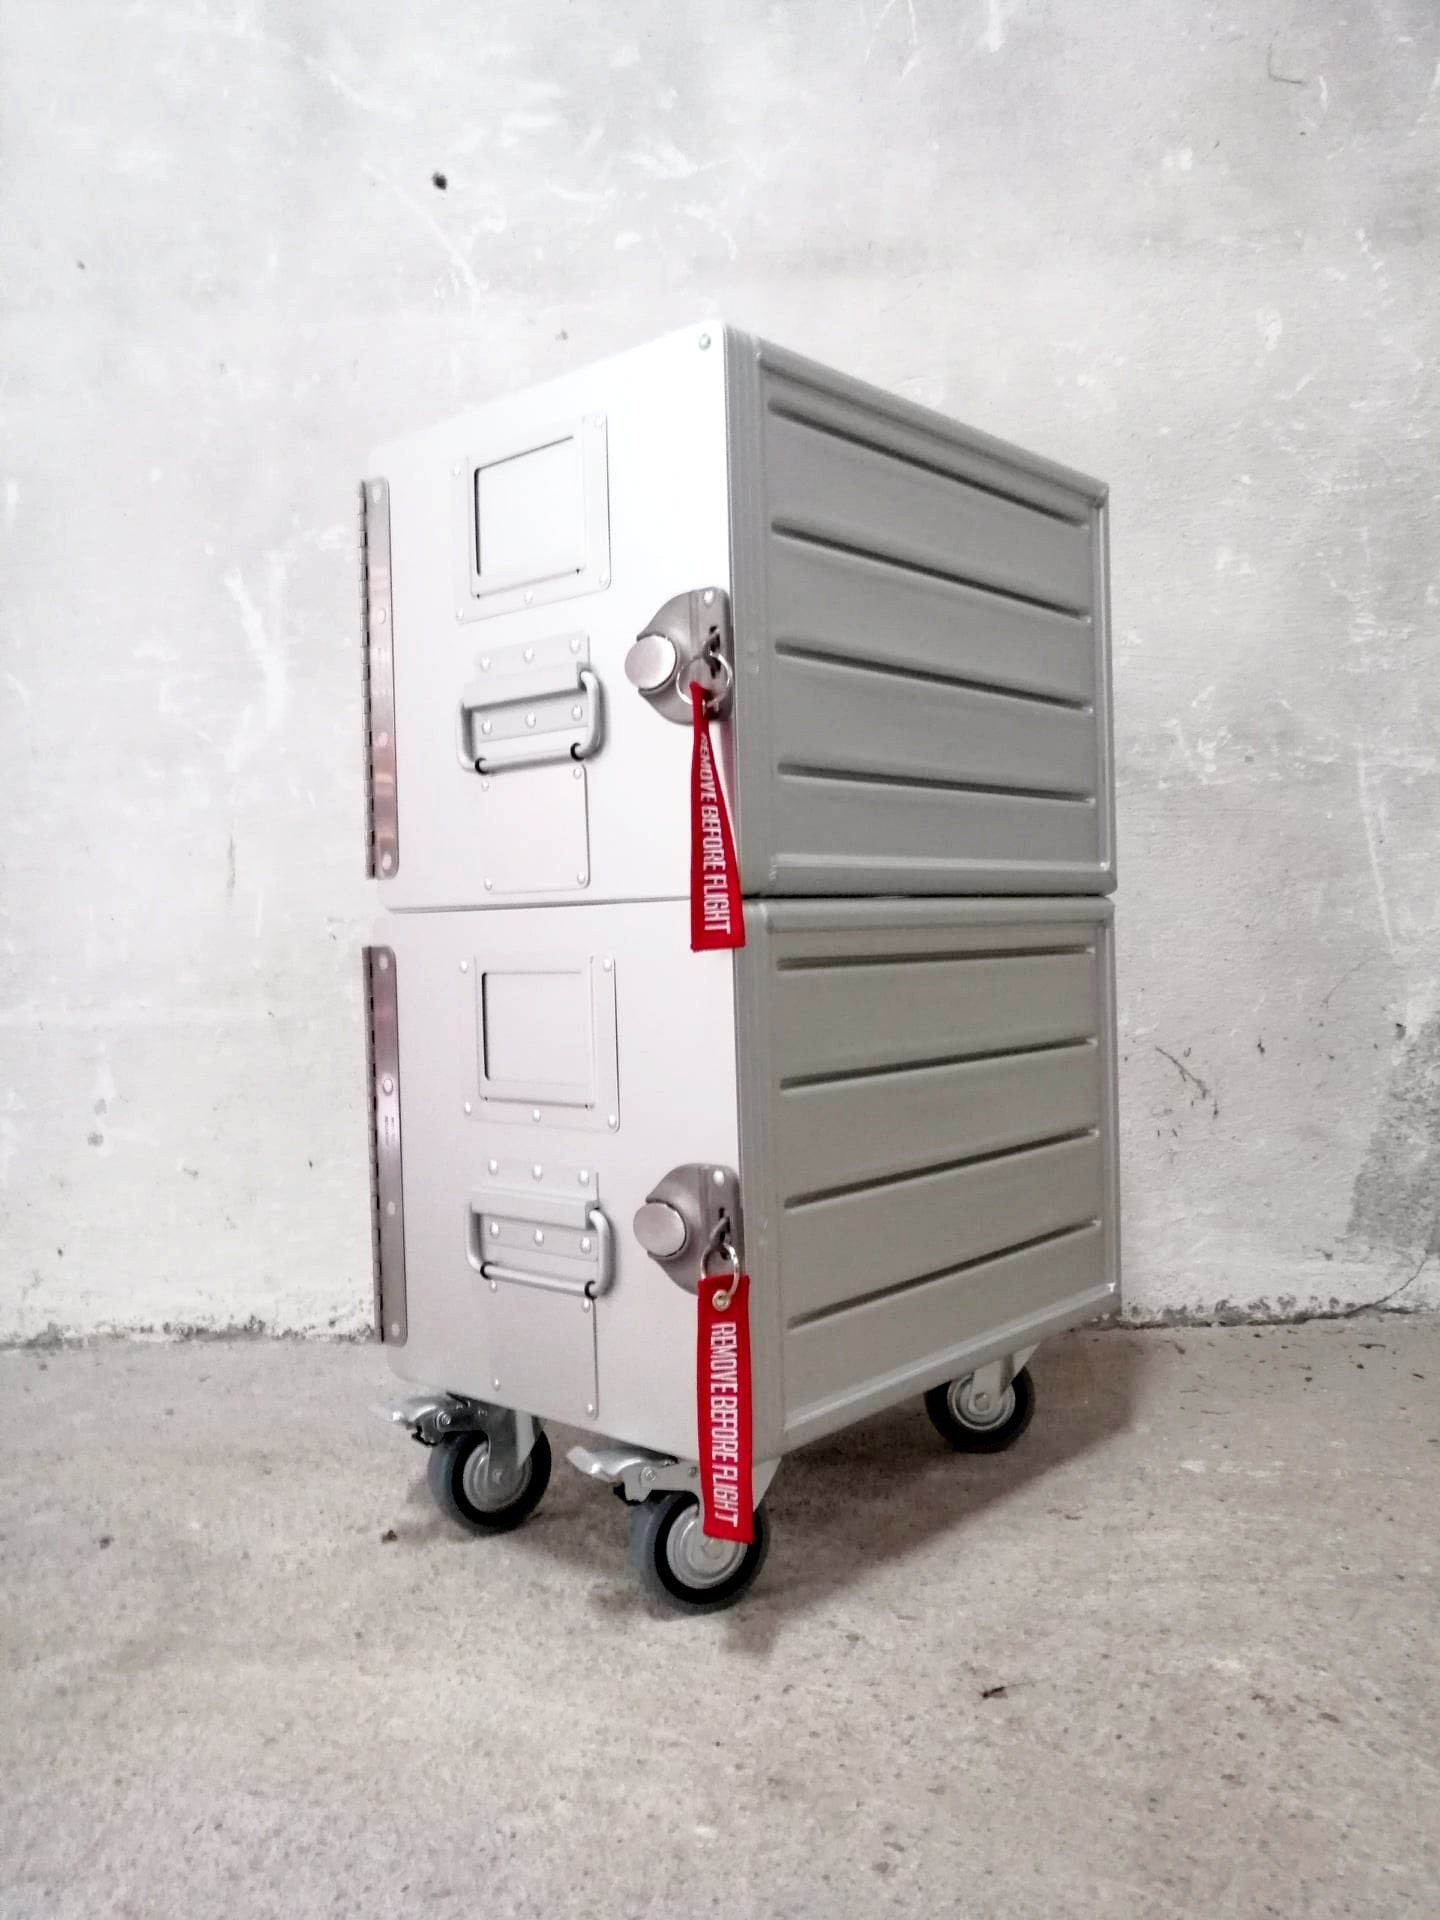 Brand New Aircraft Cabinet, Aviaton Storage Cart, Side Table Made of NEW Airline Galley Boxes Hainan with 4 Aluminium Drawers, Handmade